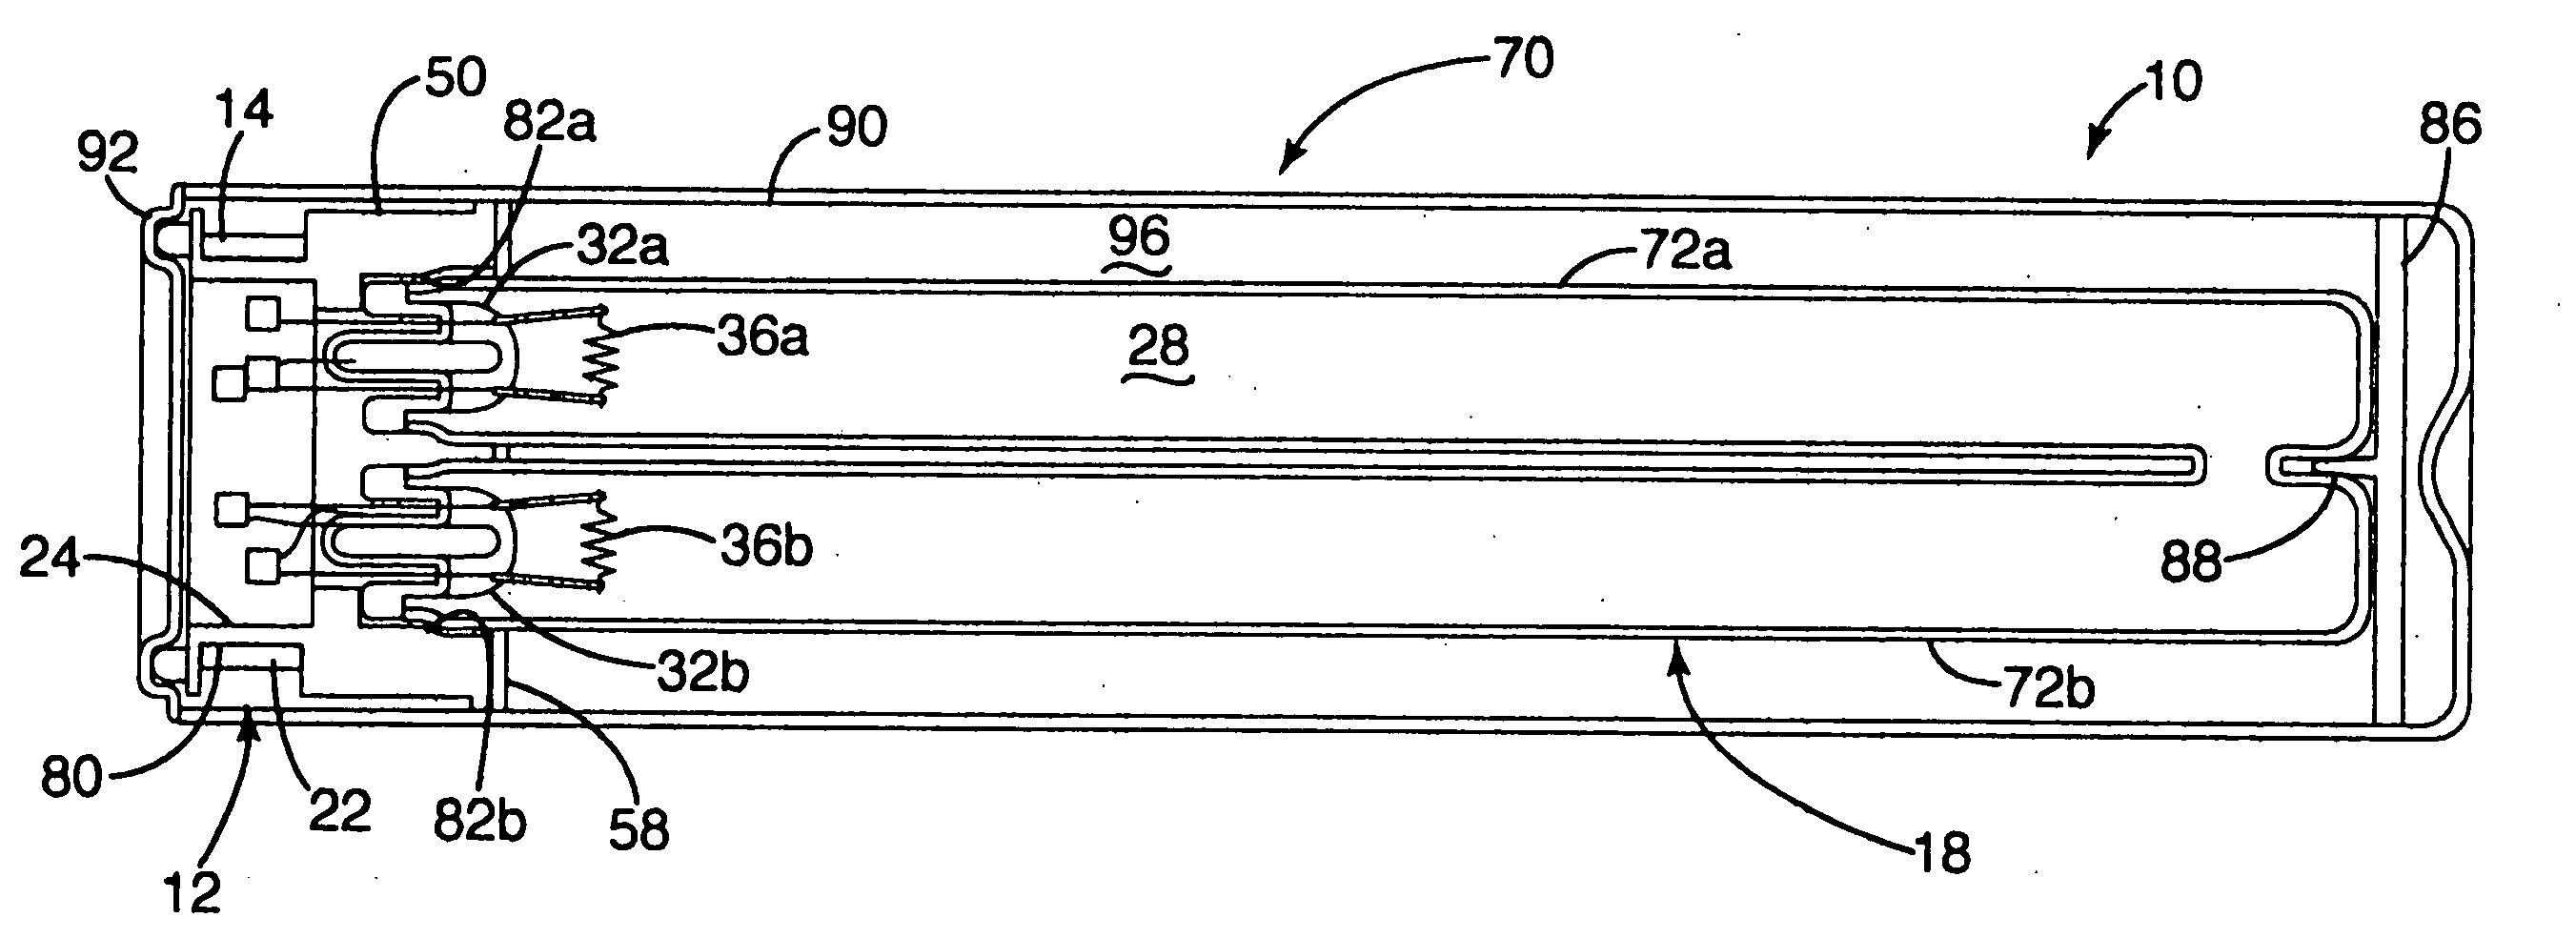 Method of manufacturing a lamp assembly